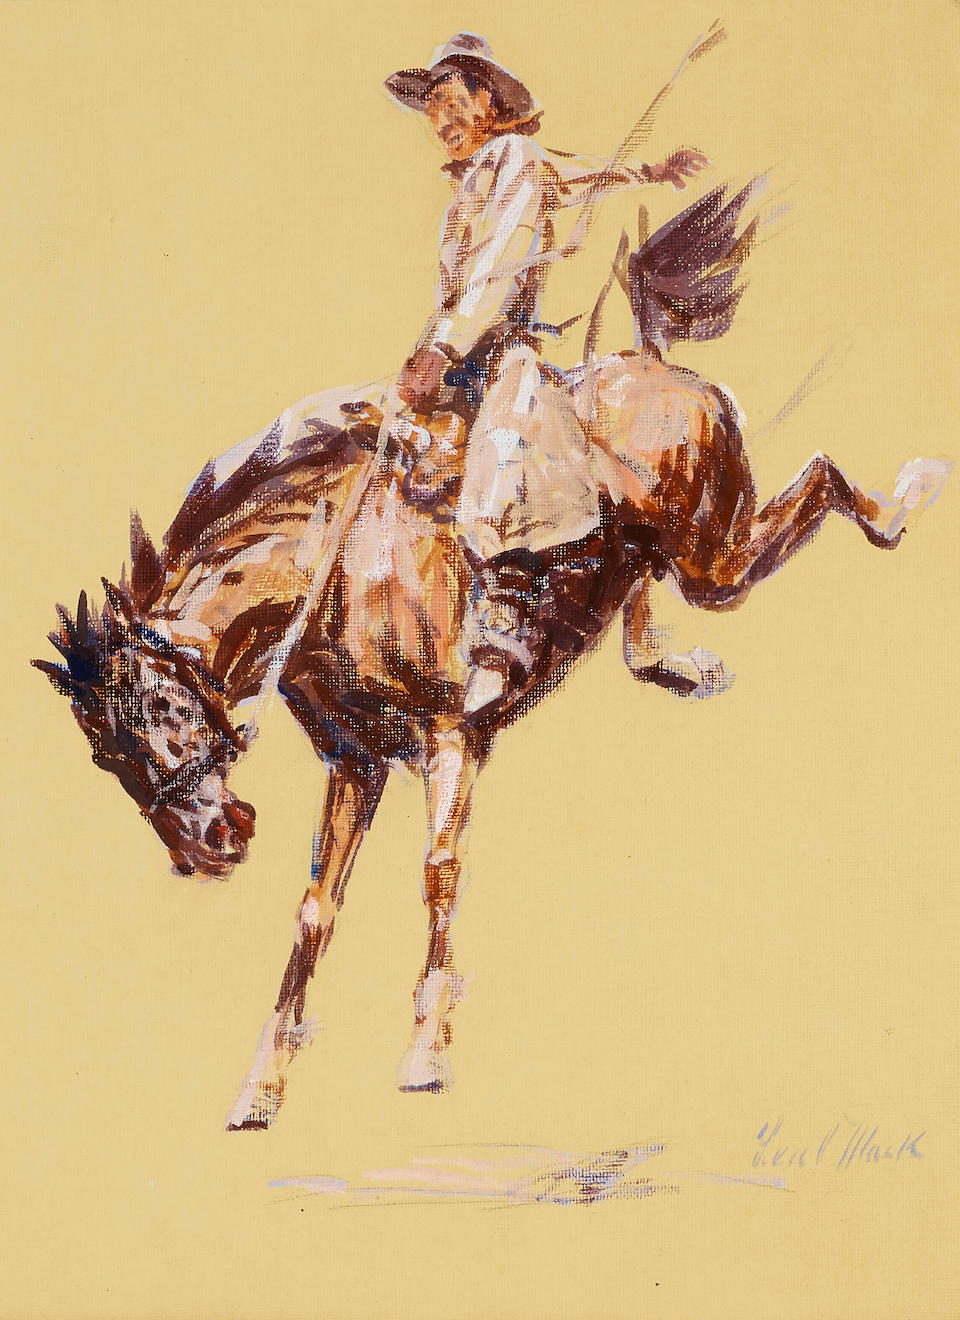 Leal Mack (1892-1962) Bucking Bronco No. 1, 2, 3 (a group of 3) each 15 x 11in each framed 22 x 18in